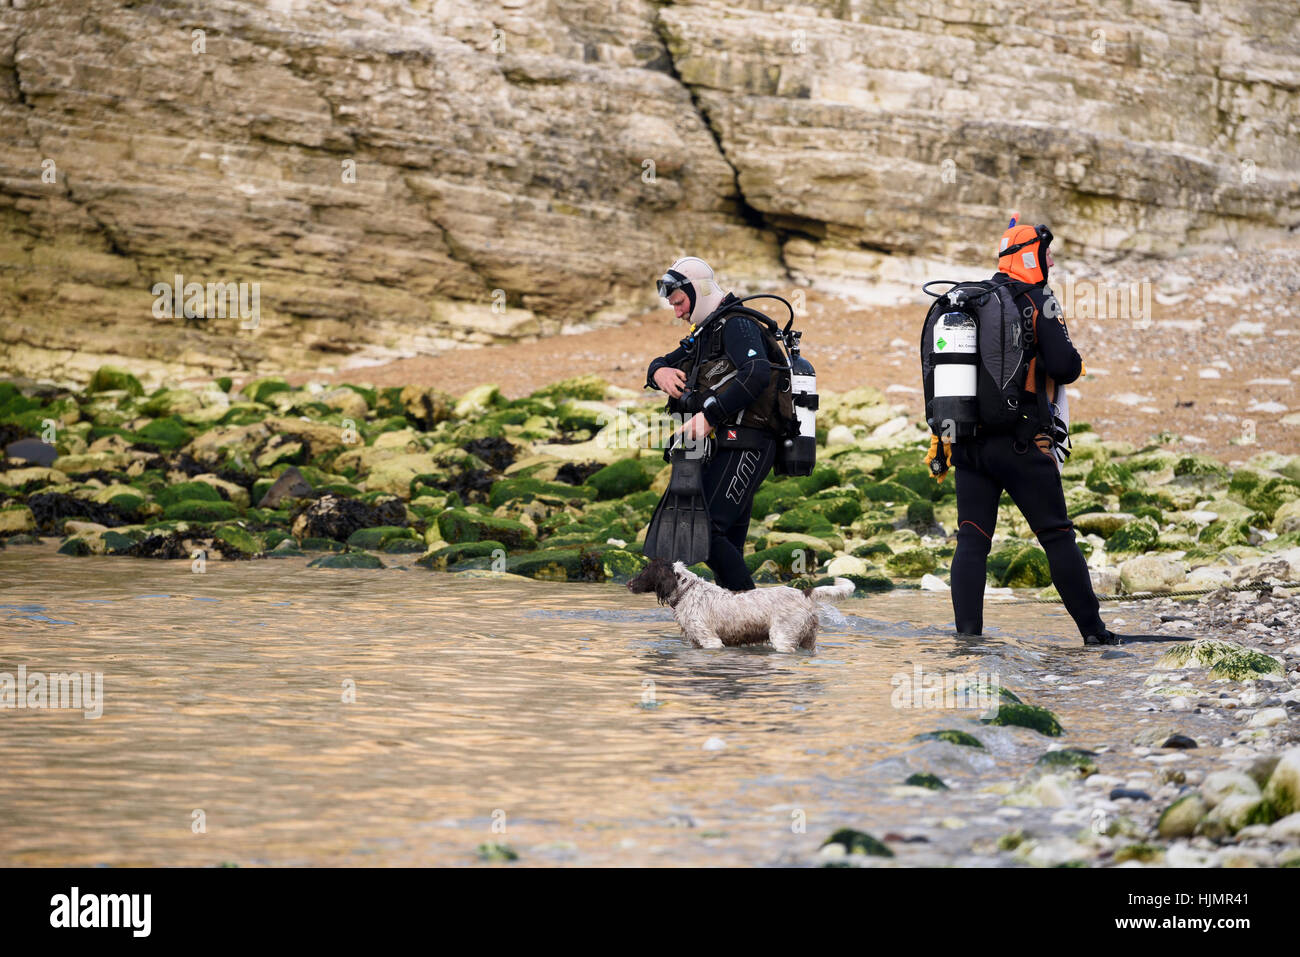 Scuba diving is a popular leisure activity and here, 3 male divers are preparing to go into the sea - North Landing, Flamborough, East Yorkshire, GB. Stock Photo